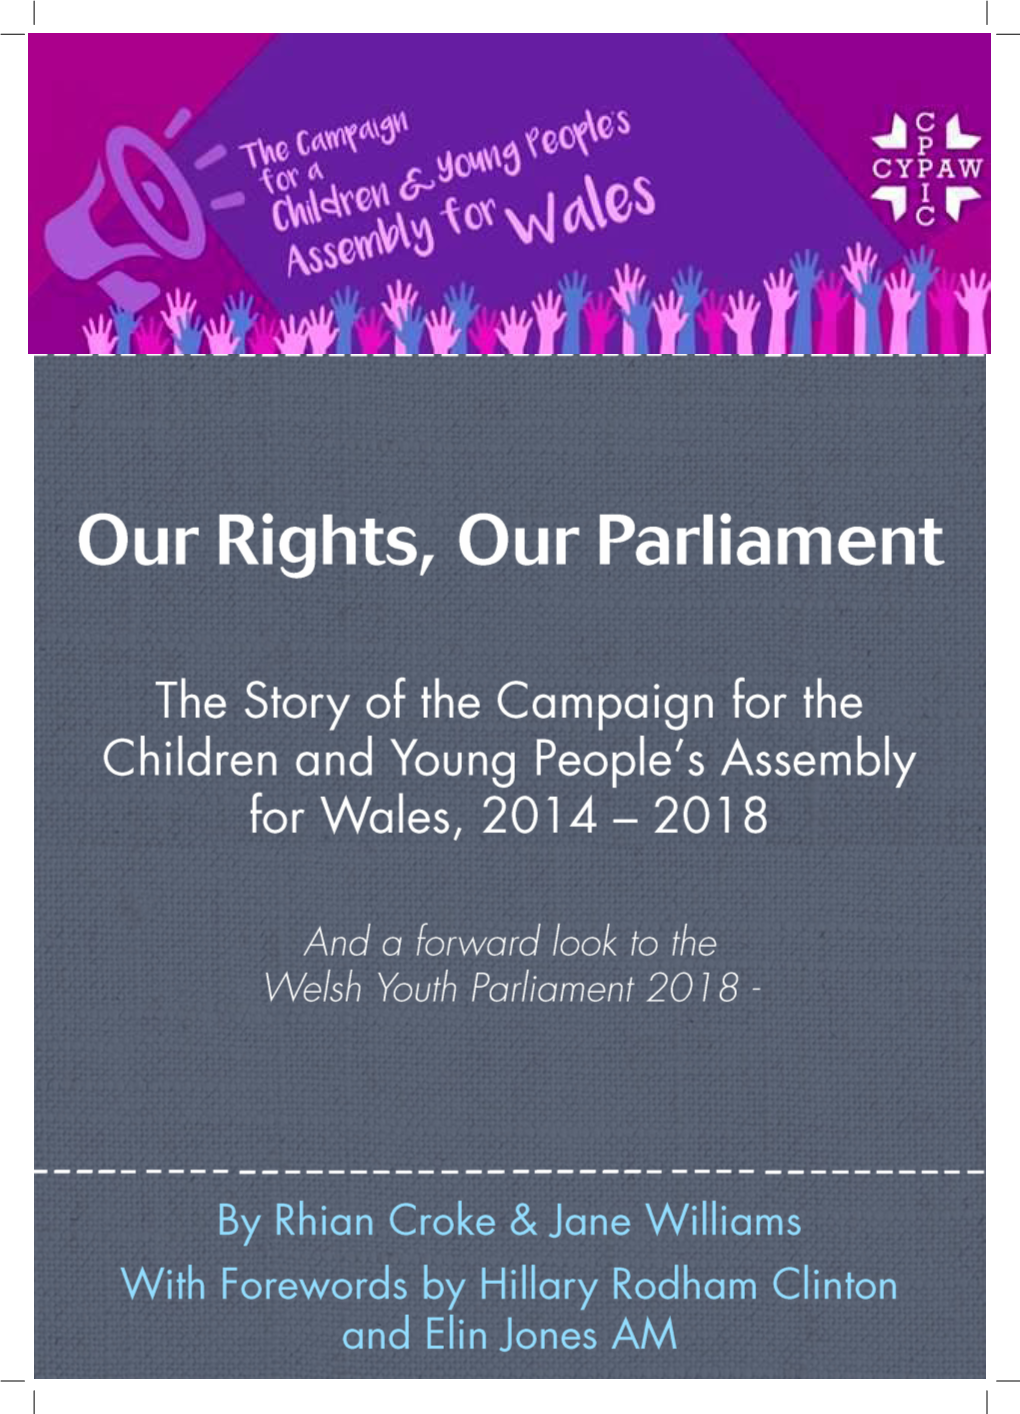 Our Rights, Our Parliament, 2018 Contents